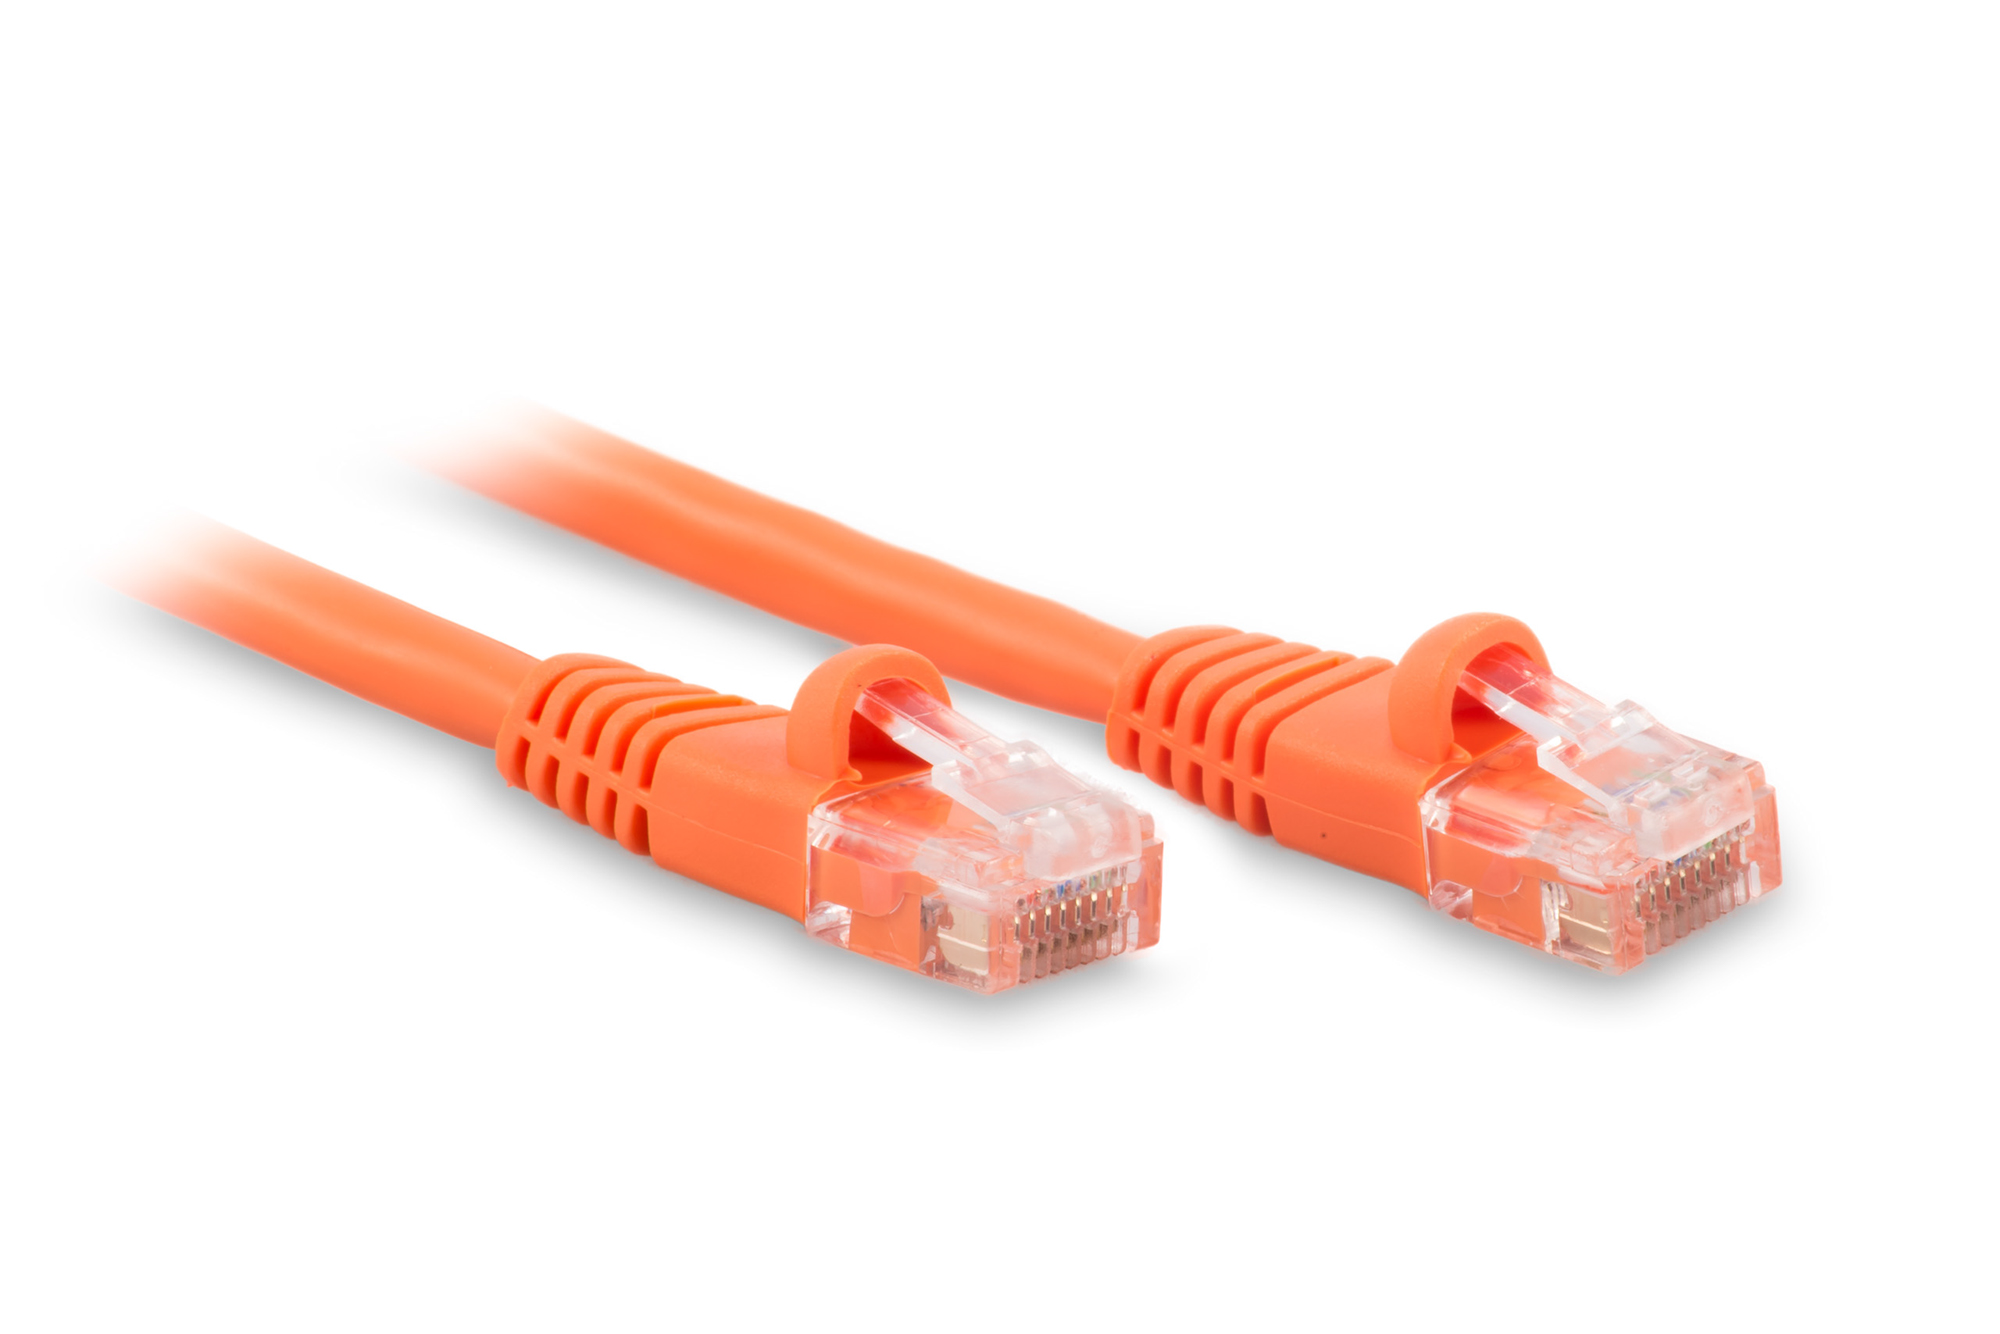 30ft Cat6 Ethernet Patch Cable - Orange Color - Snagless Boot